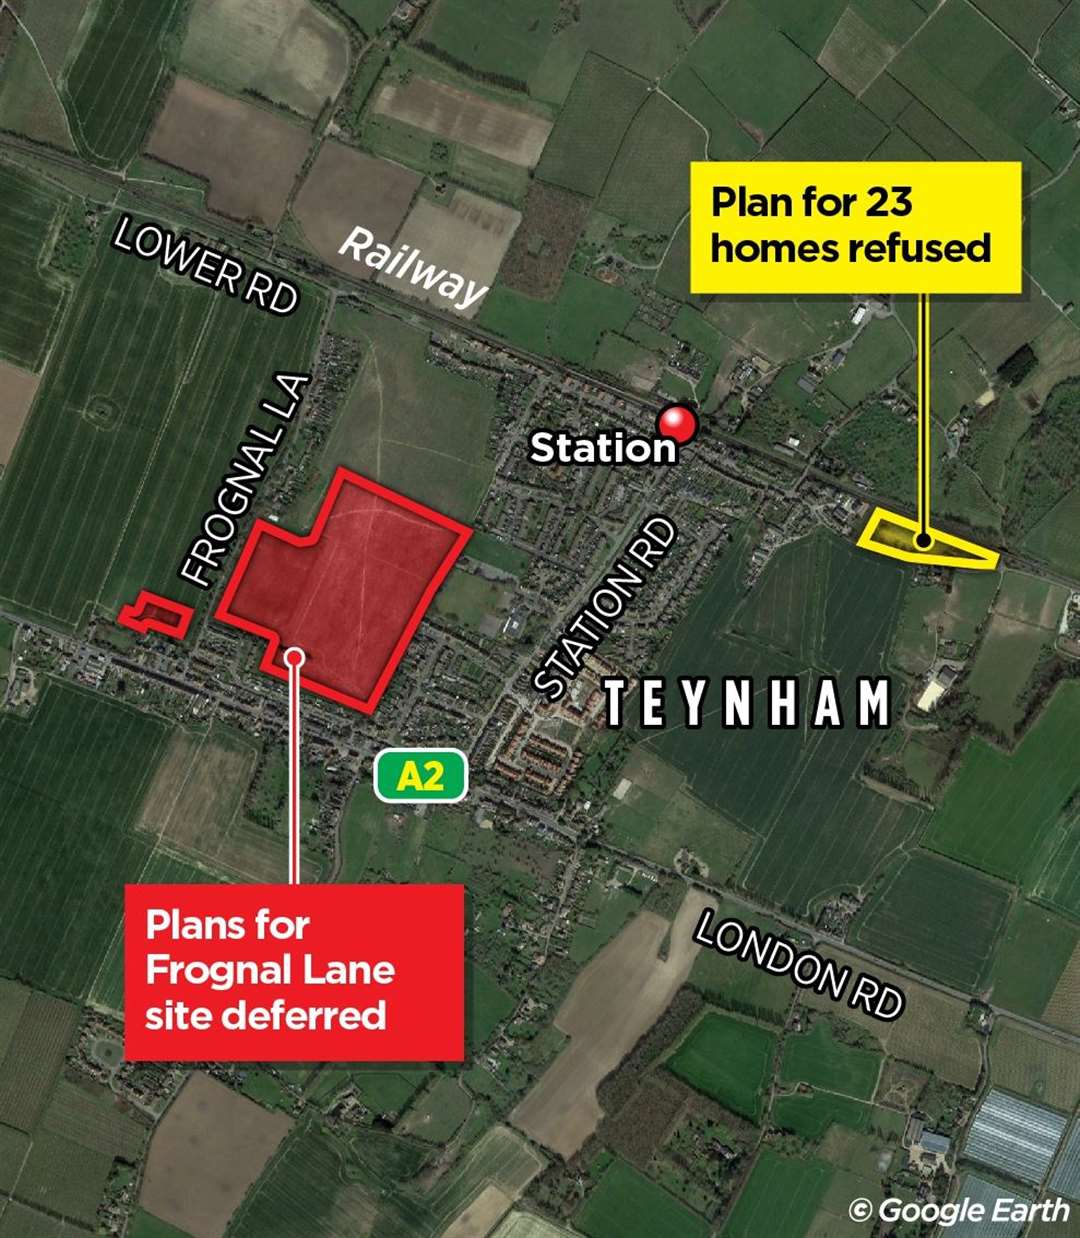 Where the 23 homes would have been built in Lower Road, Teynham